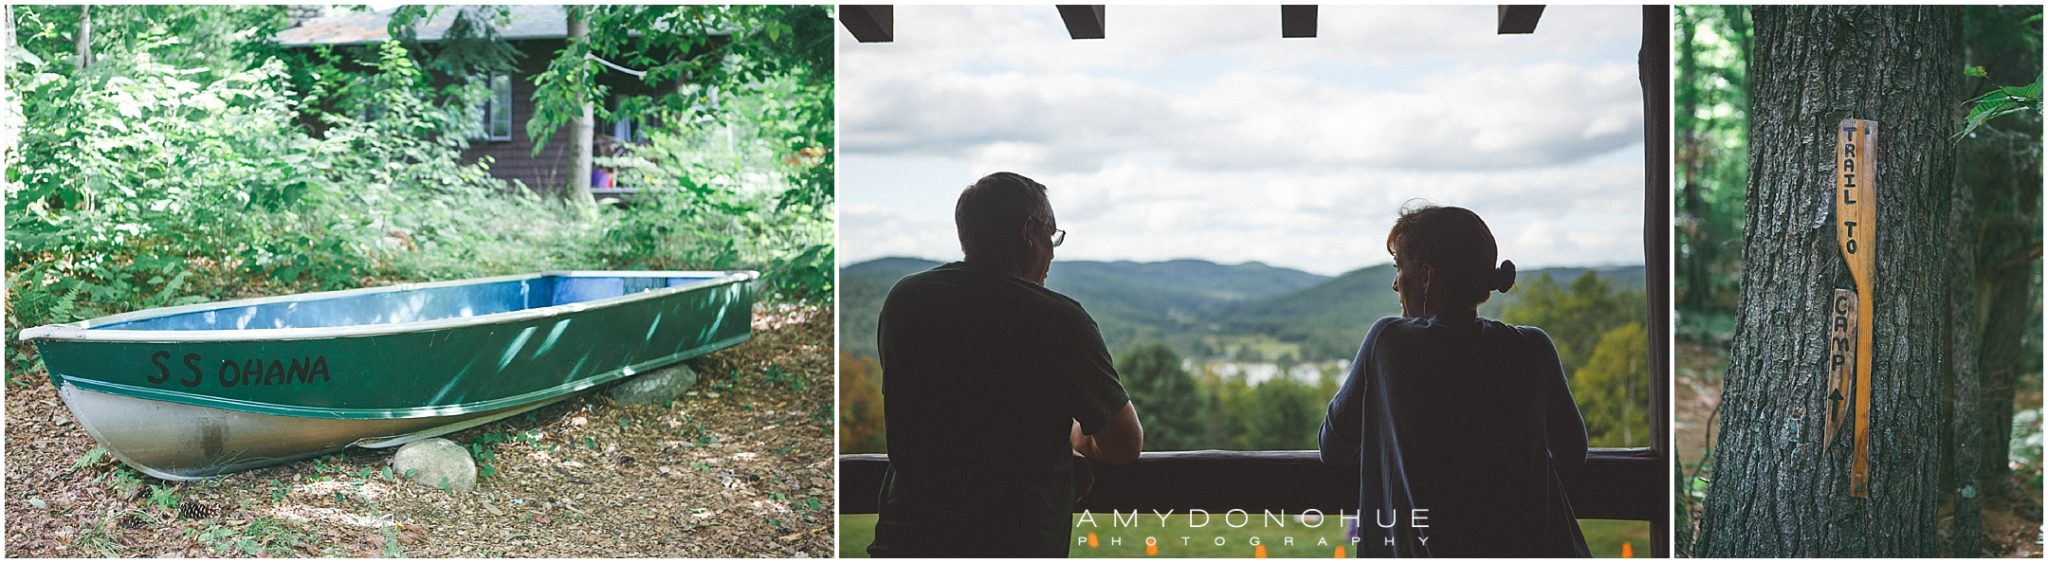 Vermont Commercial Photographer | © Amy Donohue Photography_0389